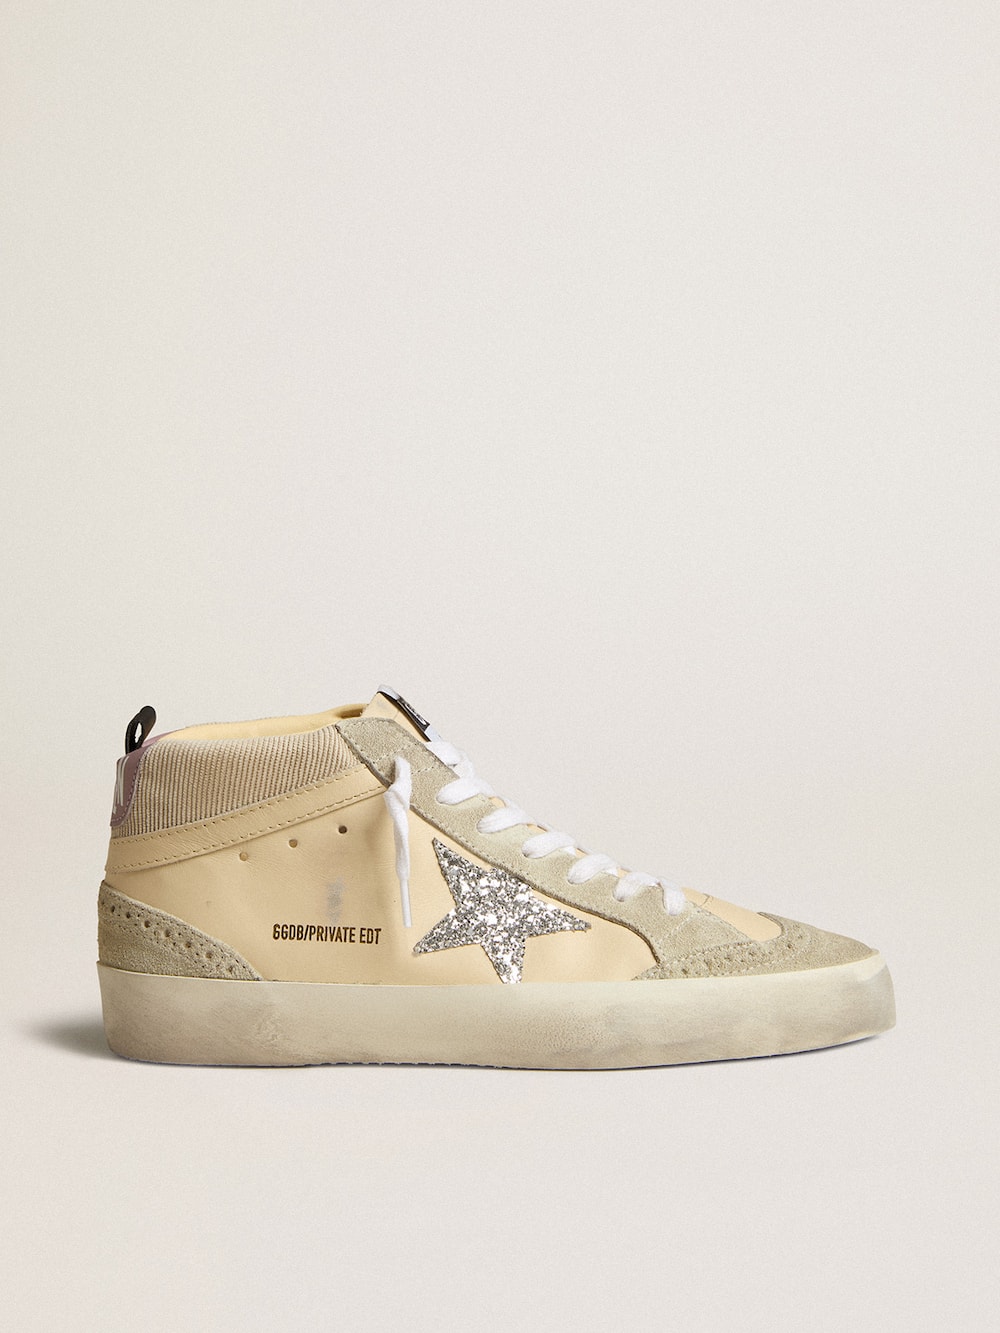 Golden Goose - Mid Star LTD in leather and corduroy with silver glitter star in 